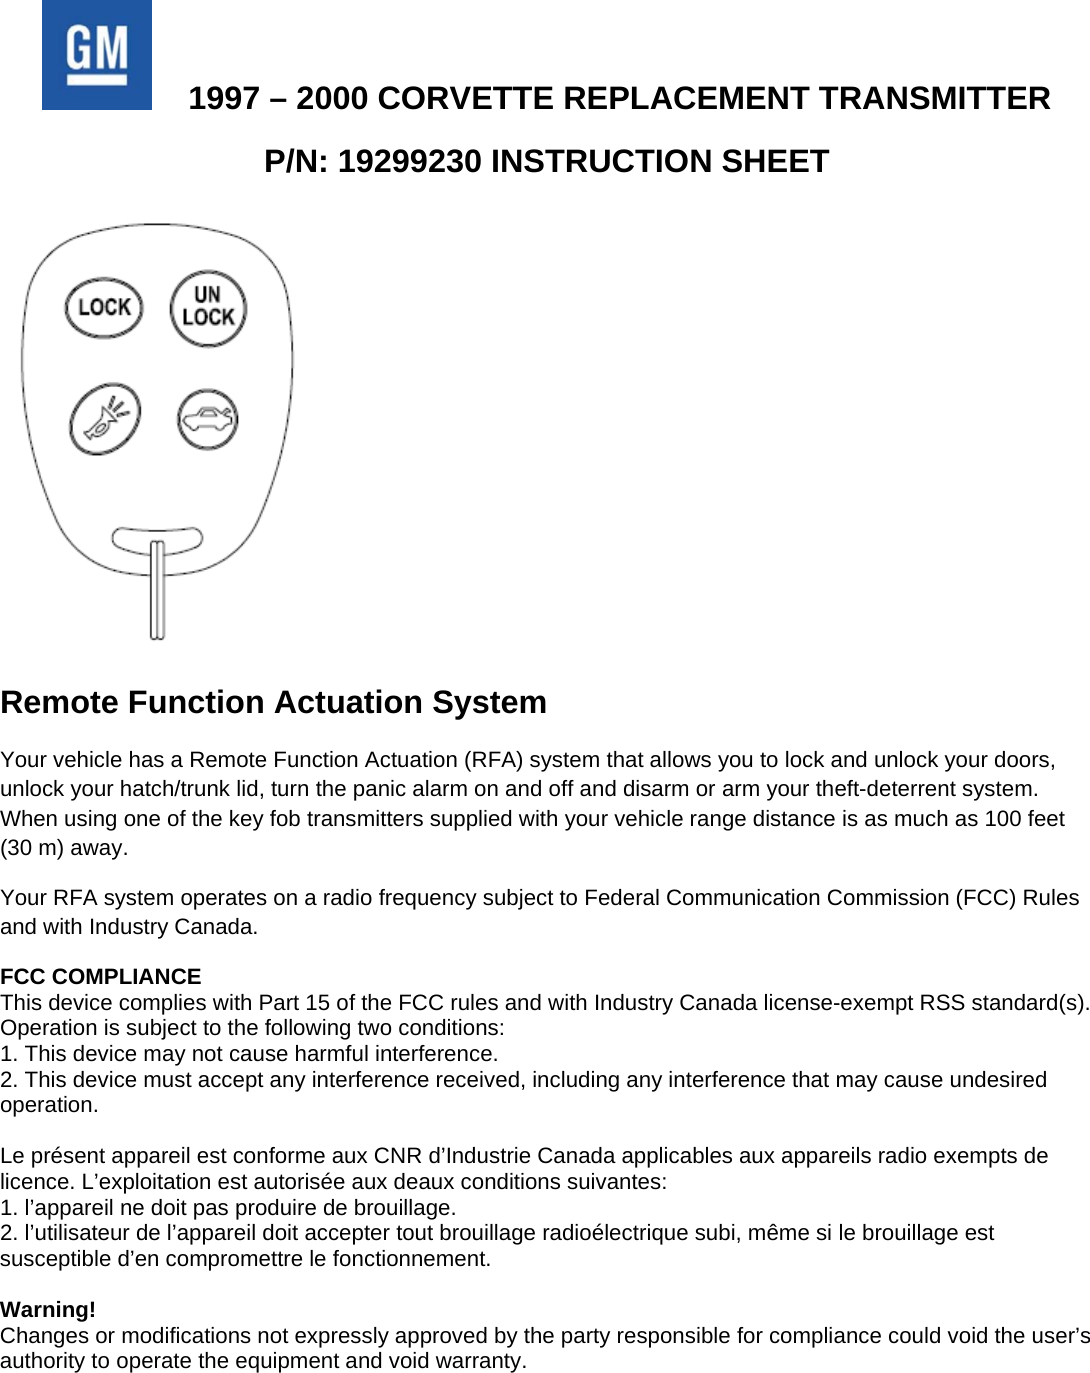   1997 – 2000 CORVETTE REPLACEMENT TRANSMITTER P/N: 19299230 INSTRUCTION SHEET  Remote Function Actuation System Your vehicle has a Remote Function Actuation (RFA) system that allows you to lock and unlock your doors, unlock your hatch/trunk lid, turn the panic alarm on and off and disarm or arm your theft-deterrent system. When using one of the key fob transmitters supplied with your vehicle range distance is as much as 100 feet (30 m) away. Your RFA system operates on a radio frequency subject to Federal Communication Commission (FCC) Rules and with Industry Canada. FCC COMPLIANCE This device complies with Part 15 of the FCC rules and with Industry Canada license-exempt RSS standard(s). Operation is subject to the following two conditions: 1. This device may not cause harmful interference. 2. This device must accept any interference received, including any interference that may cause undesired operation.  Le présent appareil est conforme aux CNR d’Industrie Canada applicables aux appareils radio exempts de licence. L’exploitation est autorisée aux deaux conditions suivantes: 1. l’appareil ne doit pas produire de brouillage. 2. l’utilisateur de l’appareil doit accepter tout brouillage radioélectrique subi, même si le brouillage est susceptible d’en compromettre le fonctionnement.  Warning! Changes or modifications not expressly approved by the party responsible for compliance could void the user’s authority to operate the equipment and void warranty.  